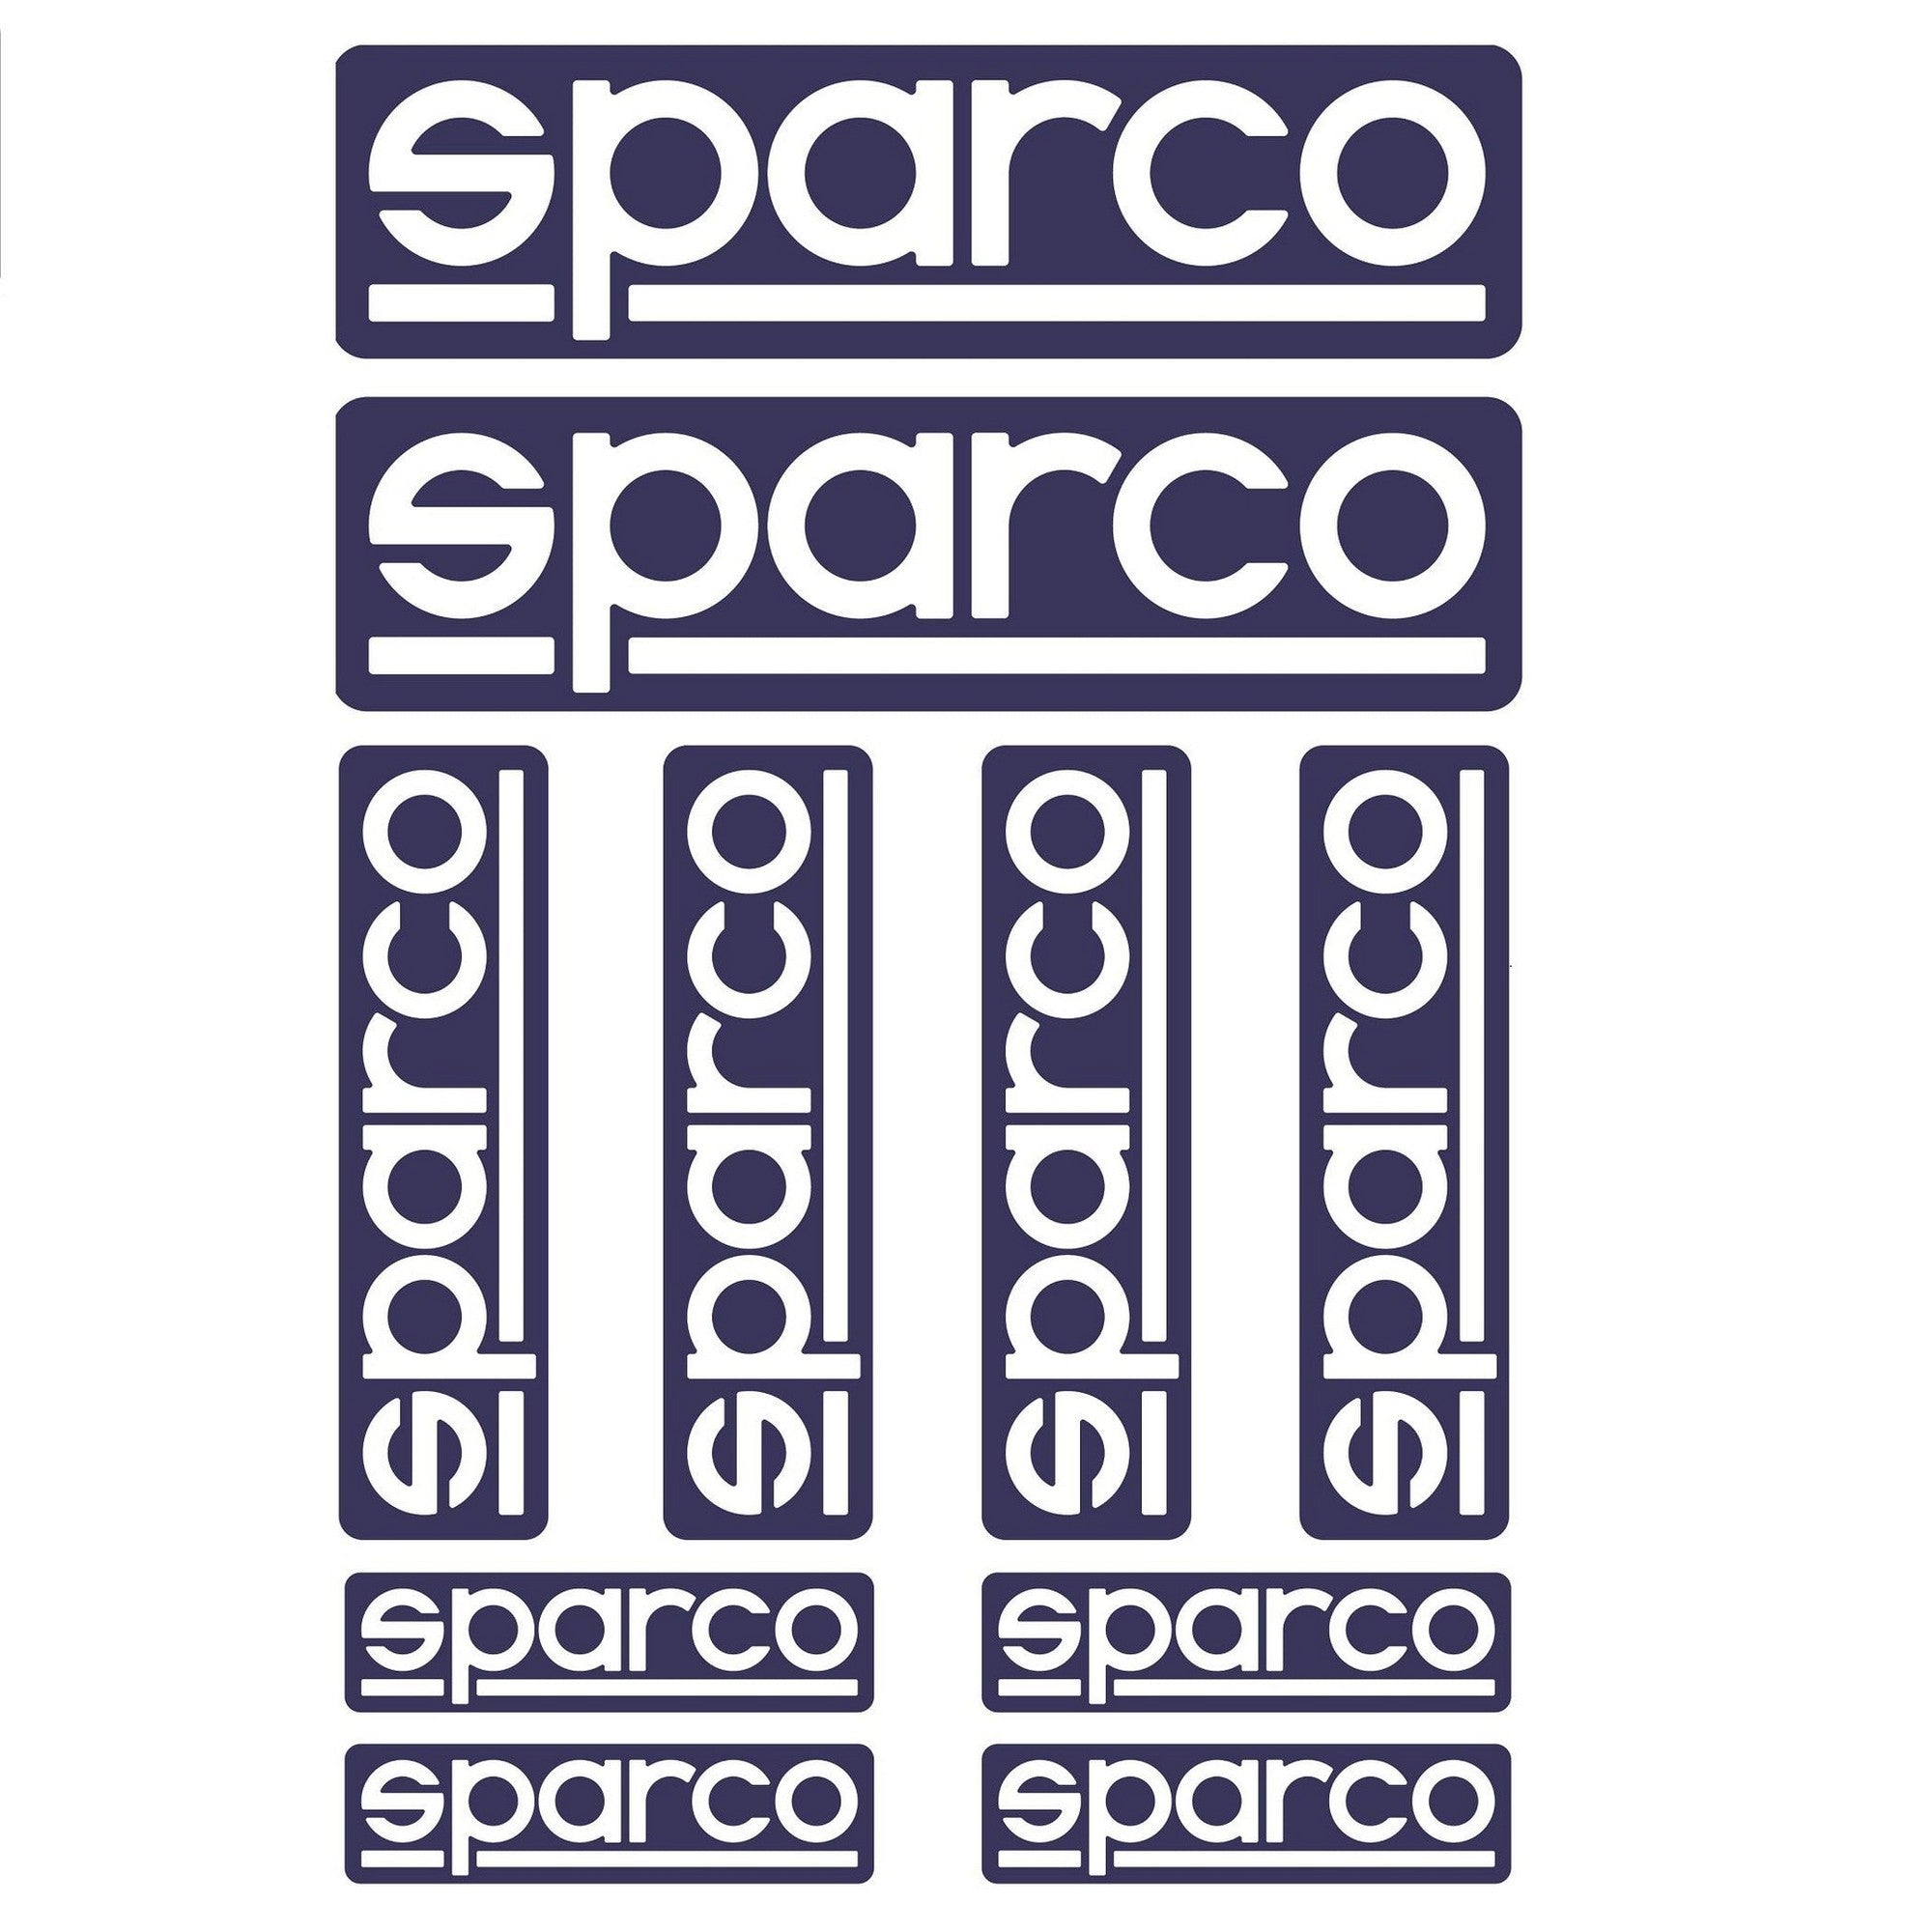 KIT OF 10 STICKERS - Sparco Shop